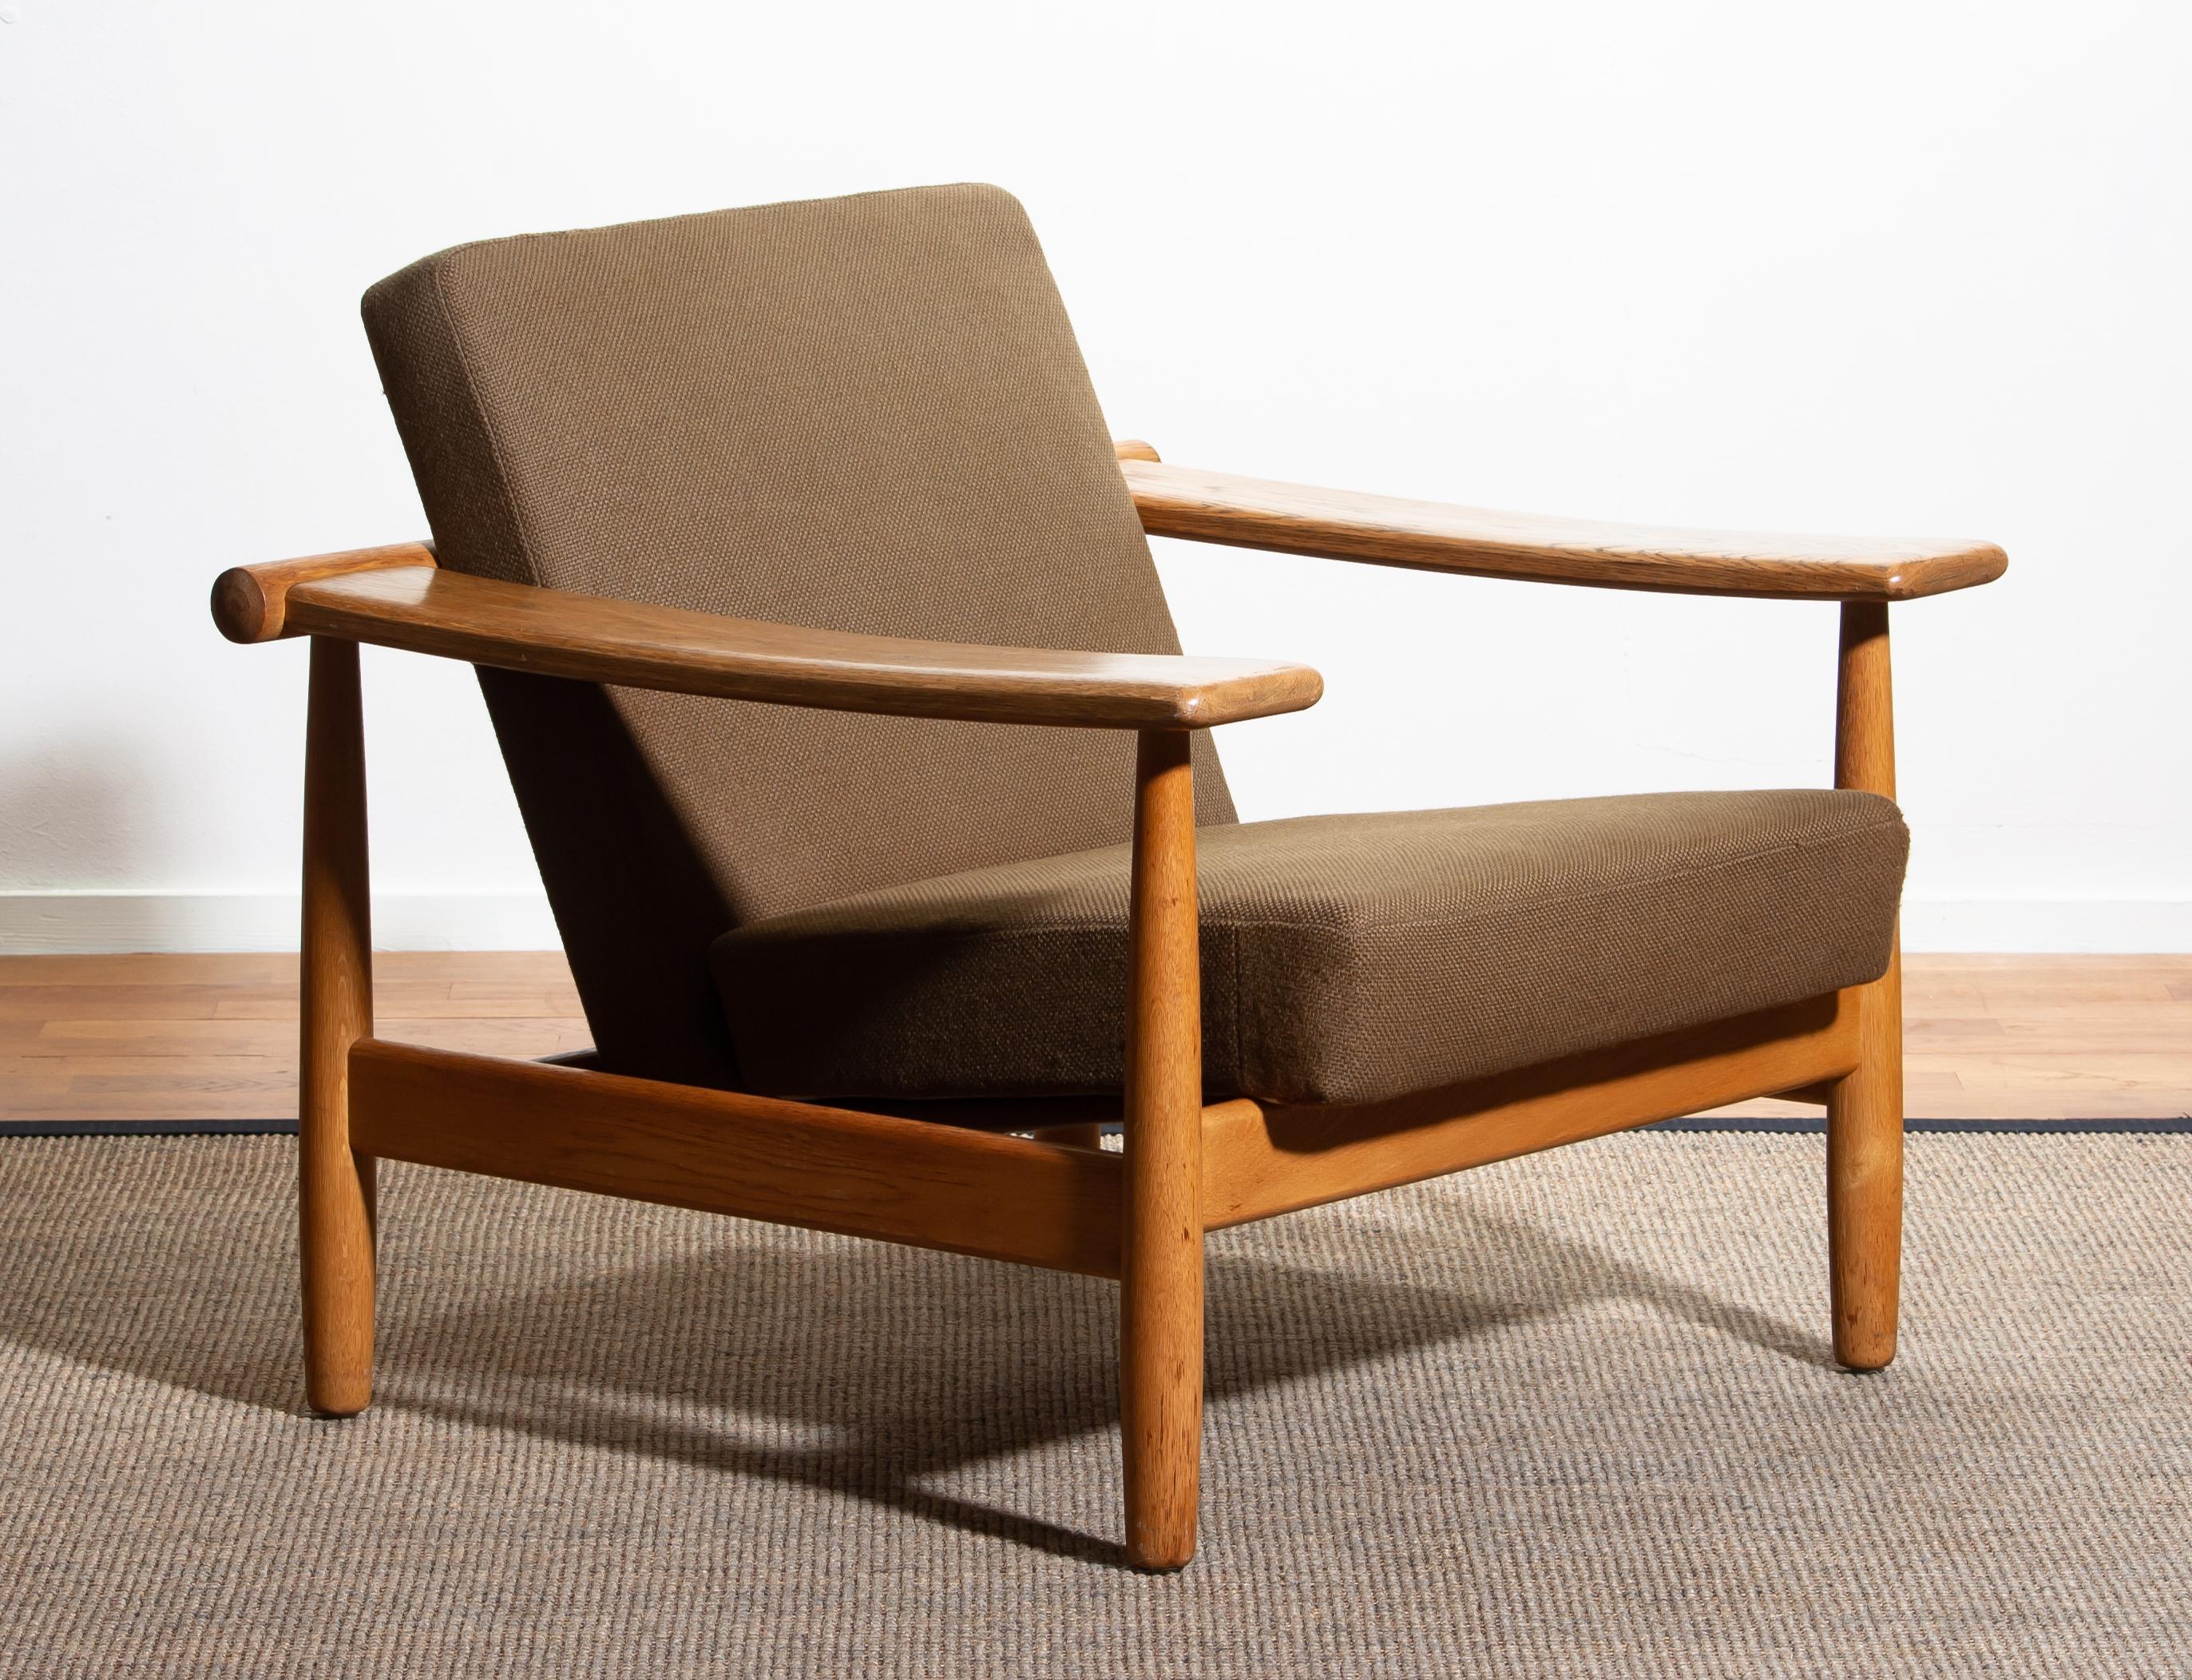 Danish 1960s, Oak Sofa and Lounge Chair/Living Room Set from Denmark in GETAMA Style